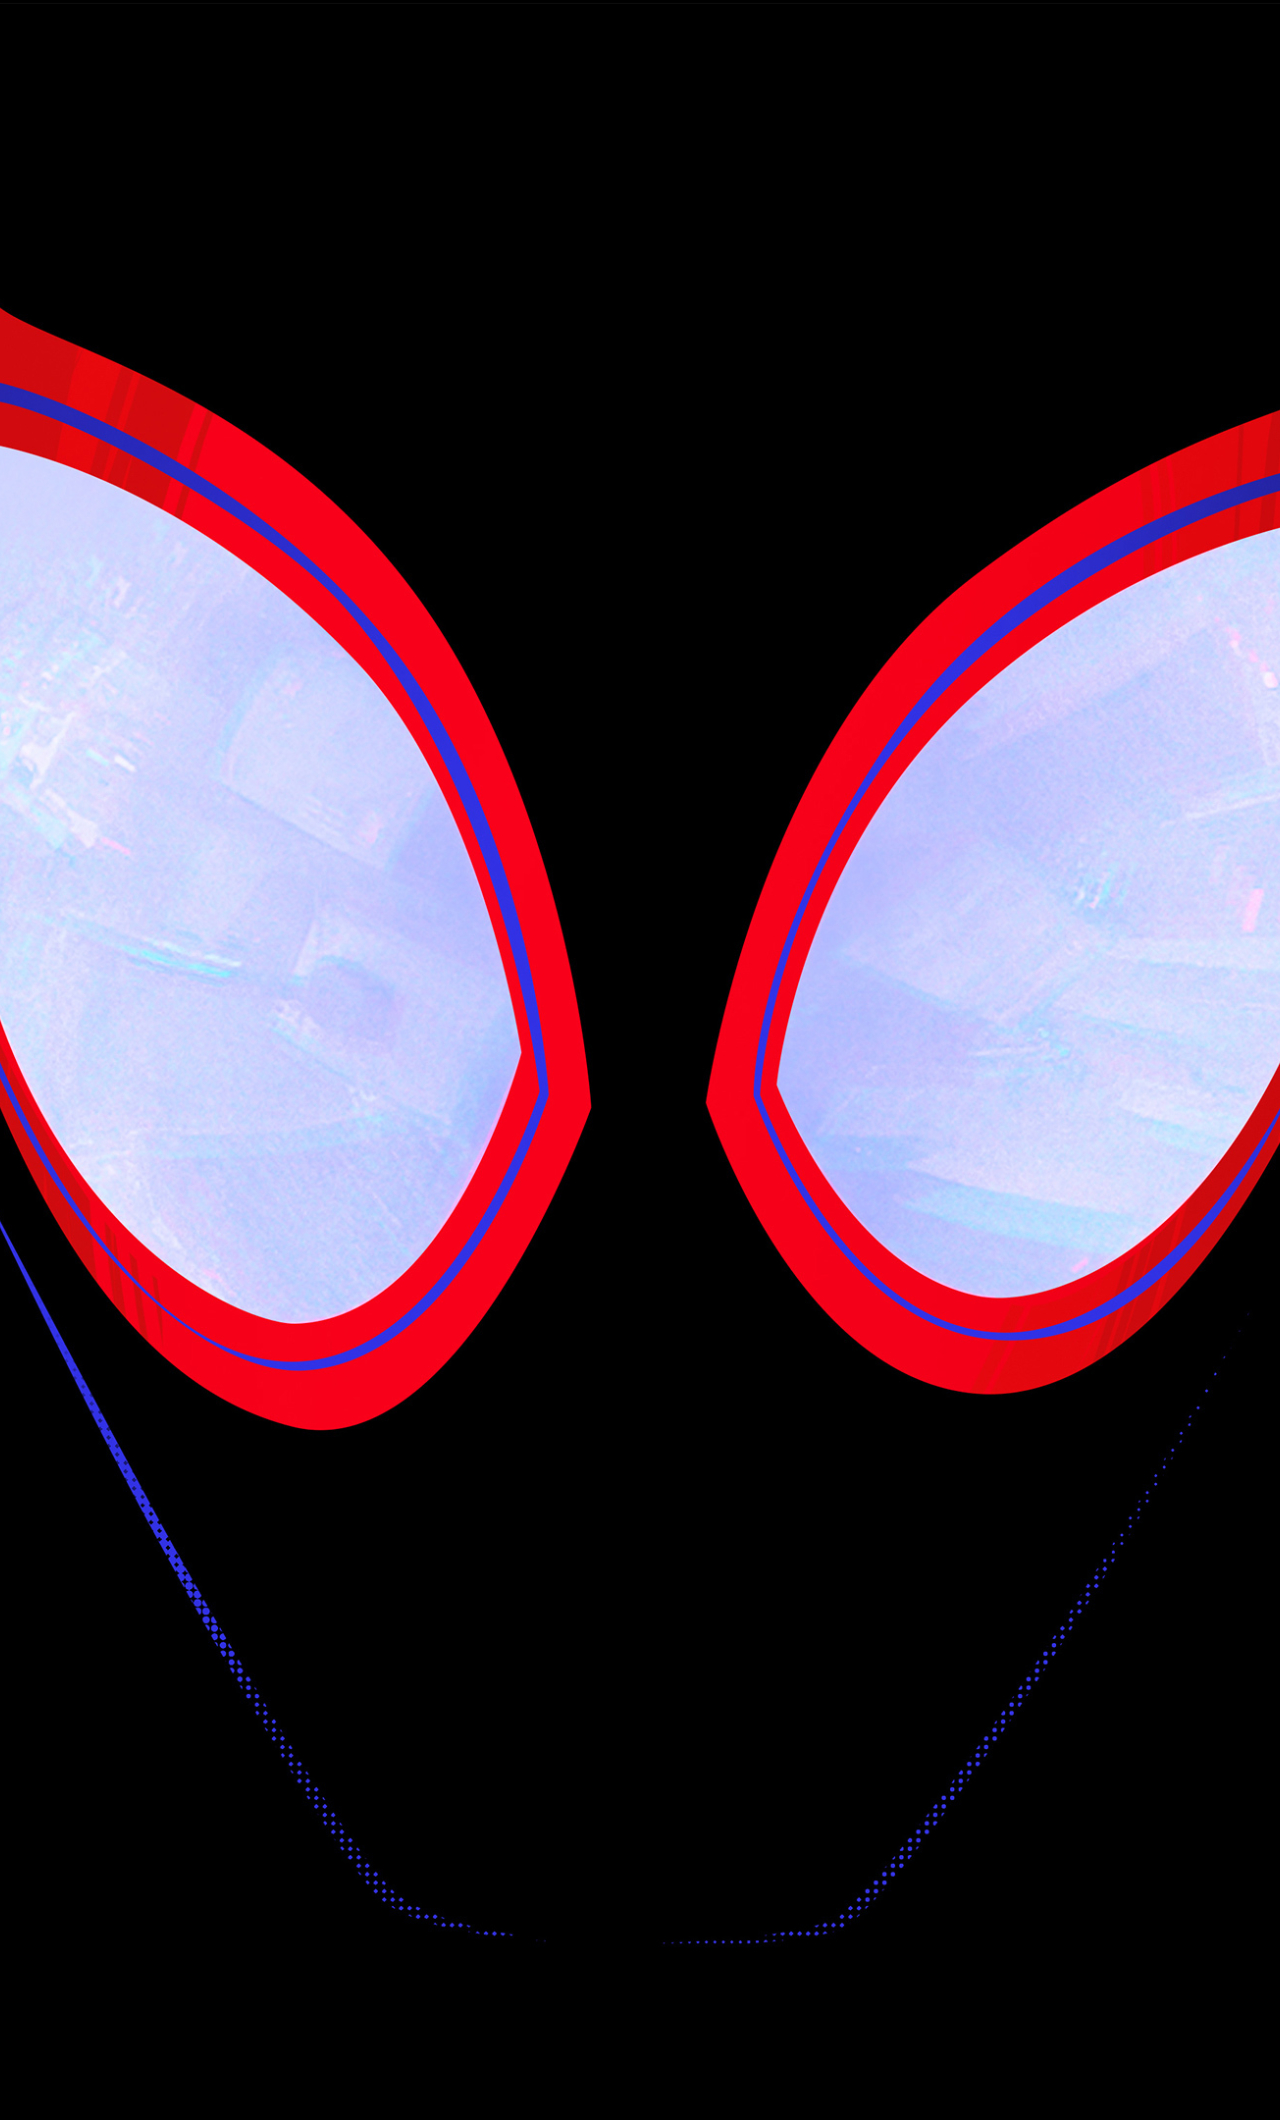 1280x2120 Spiderman Into The Spider Verse Iphone 6 Plus